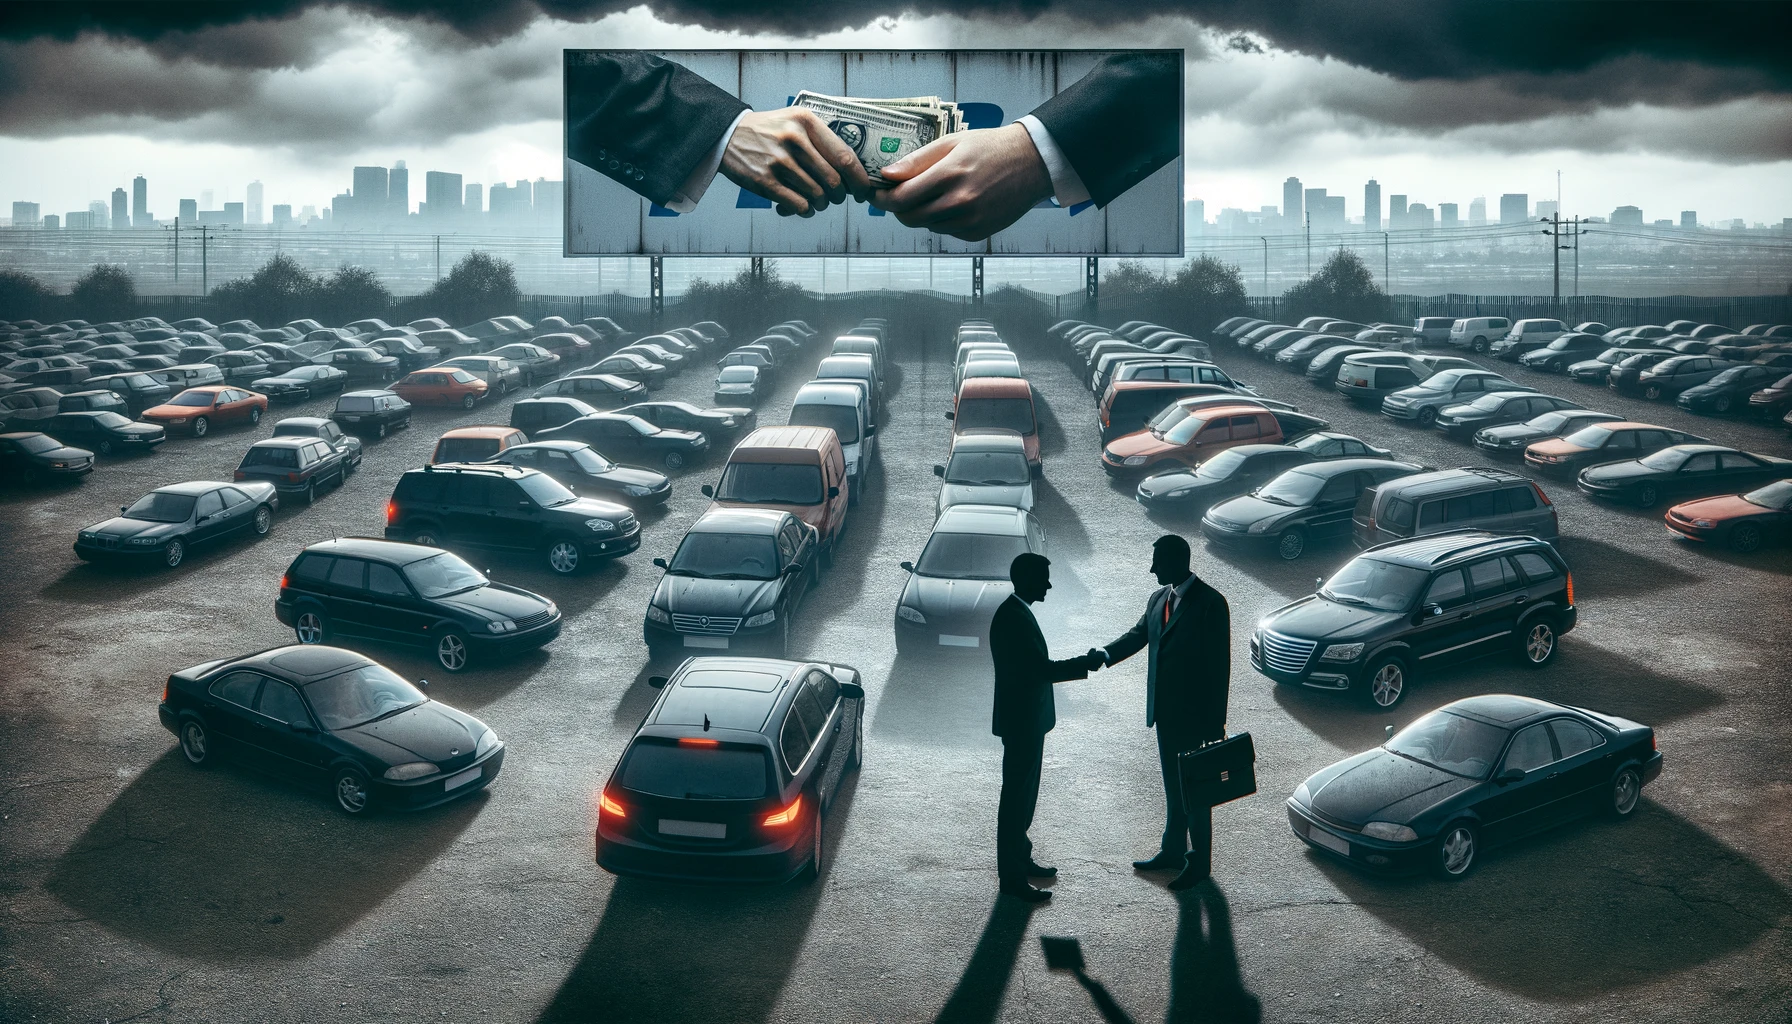 An image depicting a large, unethical used car dealership involved in fraudulent activities. The scene shows a sprawling car lot filled with various types of cars under a gloomy sky, symbolizing the dark nature of the business. There are shadowy figures in business suits, one of whom is shaking hands with another while passing an envelope discreetly, suggesting a bribe or illicit deal. The dealership's sign is prominent but looks worn and slightly damaged. The overall atmosphere is tense and suspicious, with a city skyline in the background, suggesting an urban setting.